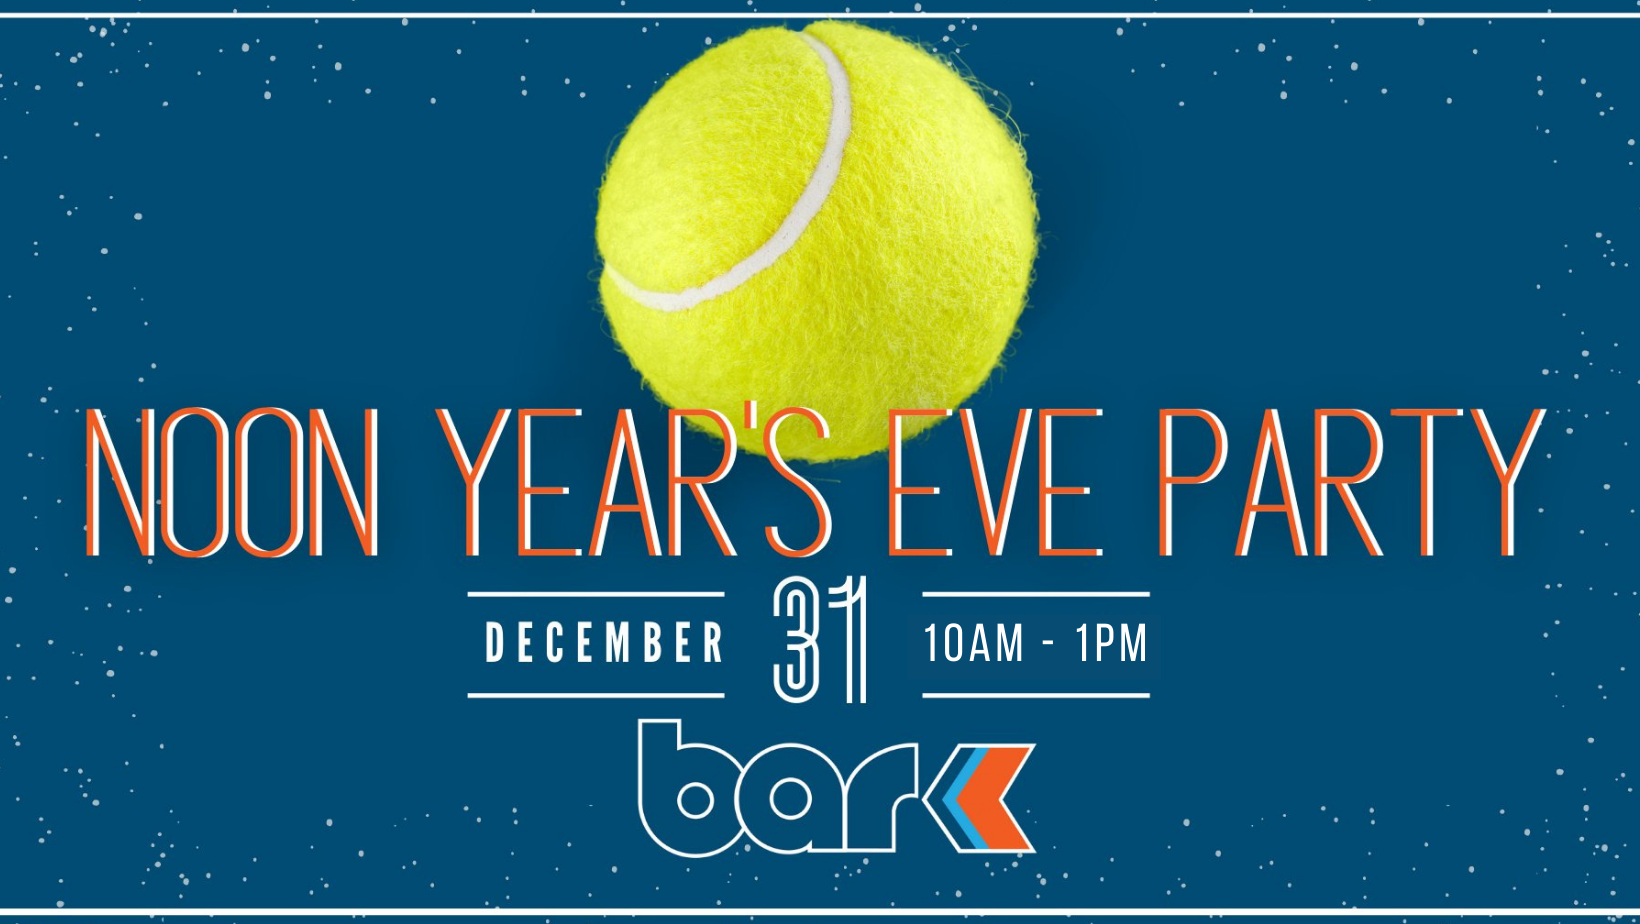 Bar Noon Year's Eve Party! K